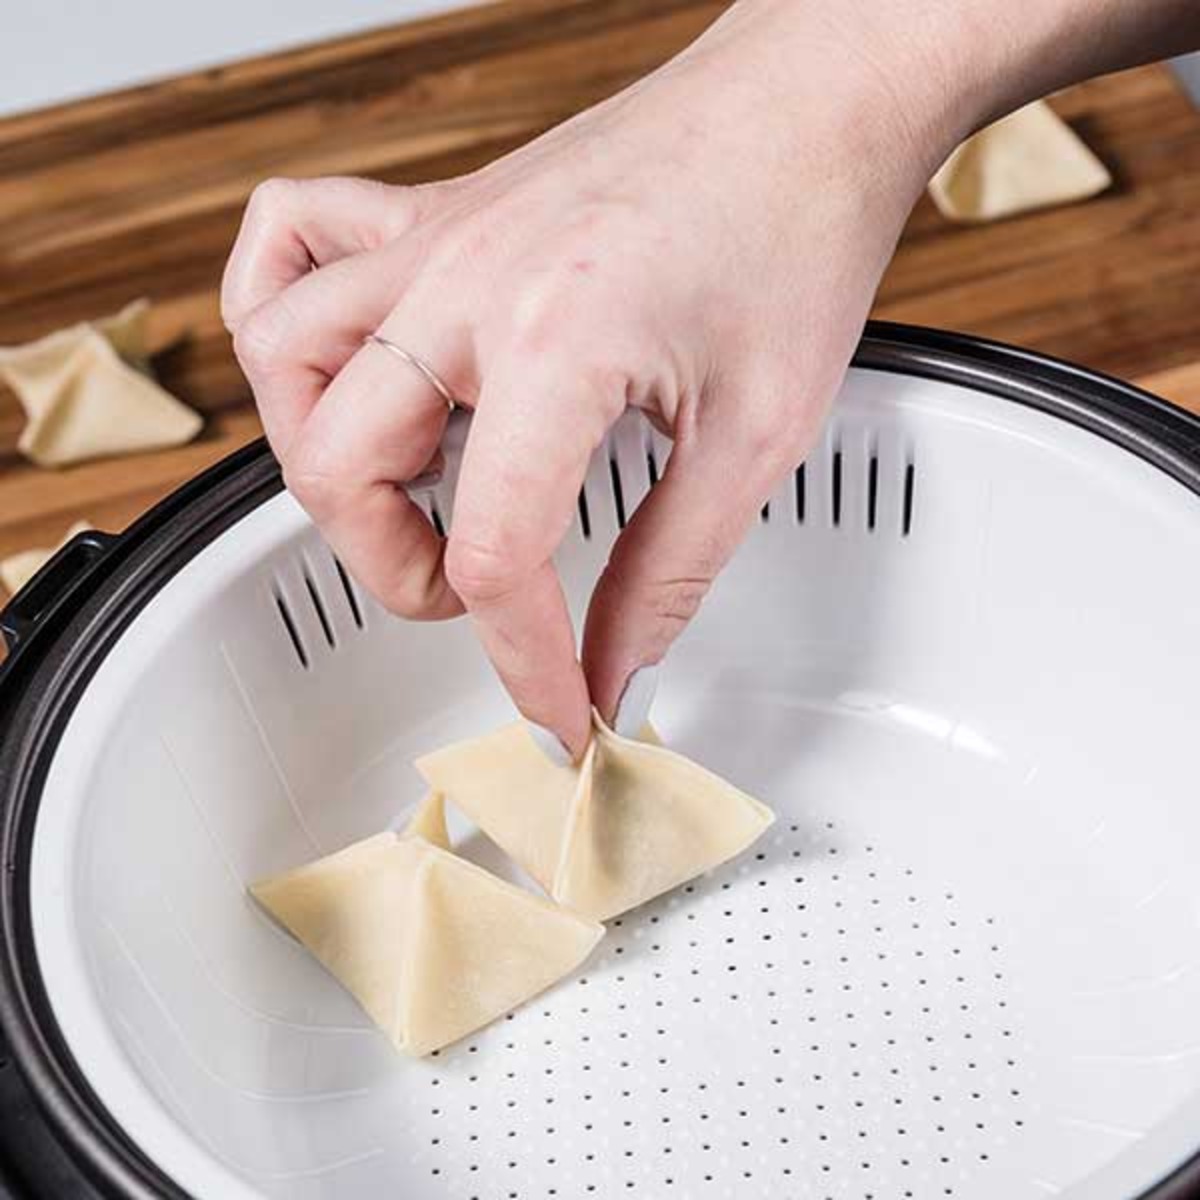 How To Steam Dumplings In Rice Cooker